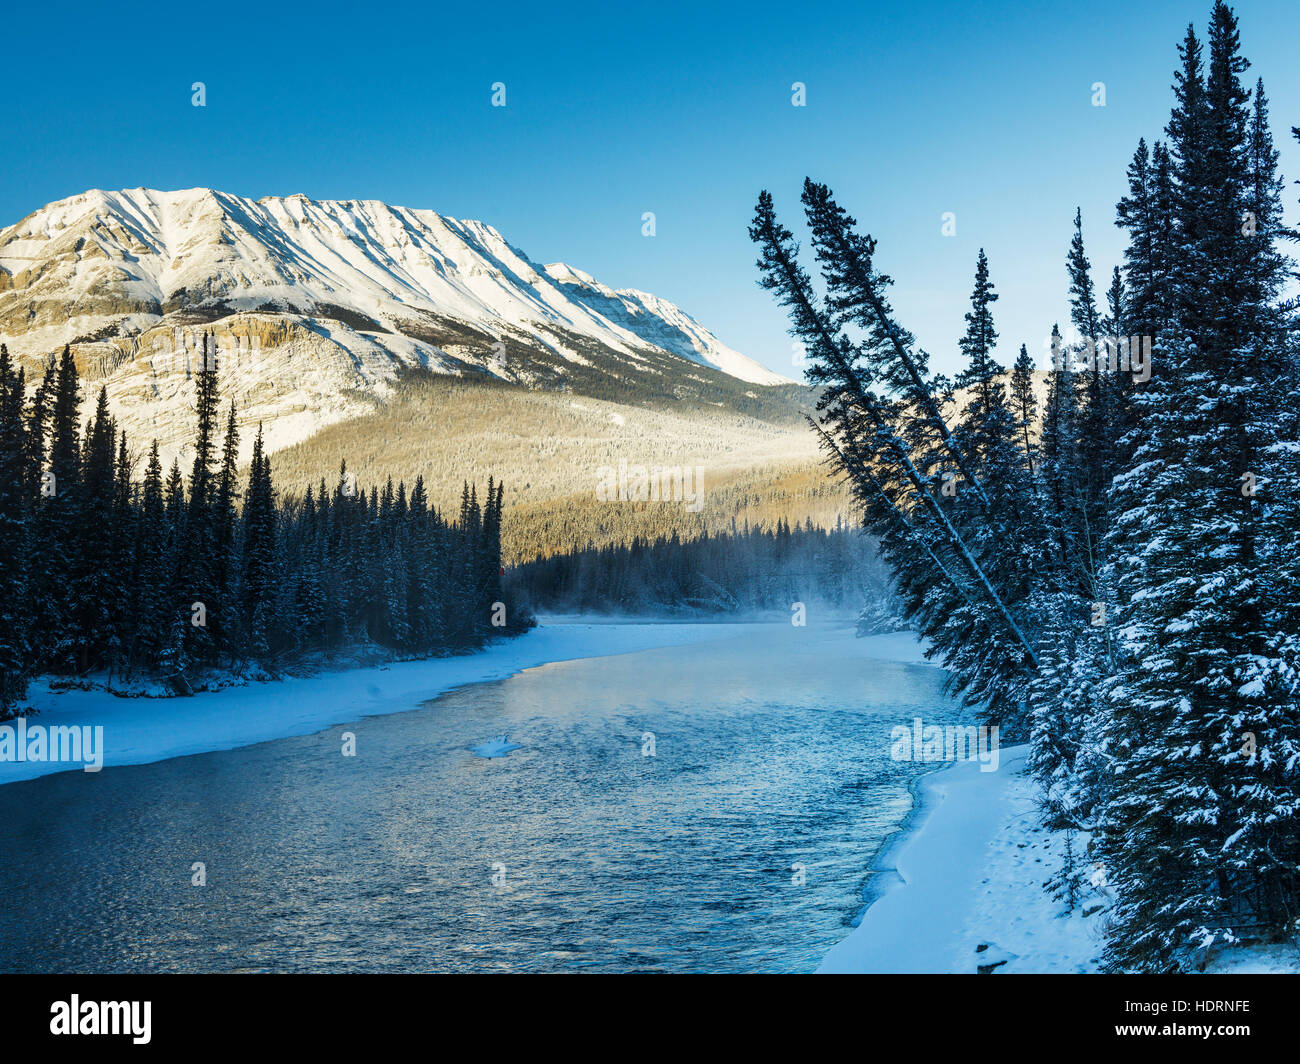 A landscape with snow along the shoreline of a lake and a snow covered mountain; British Columbia, Canada Stock Photo